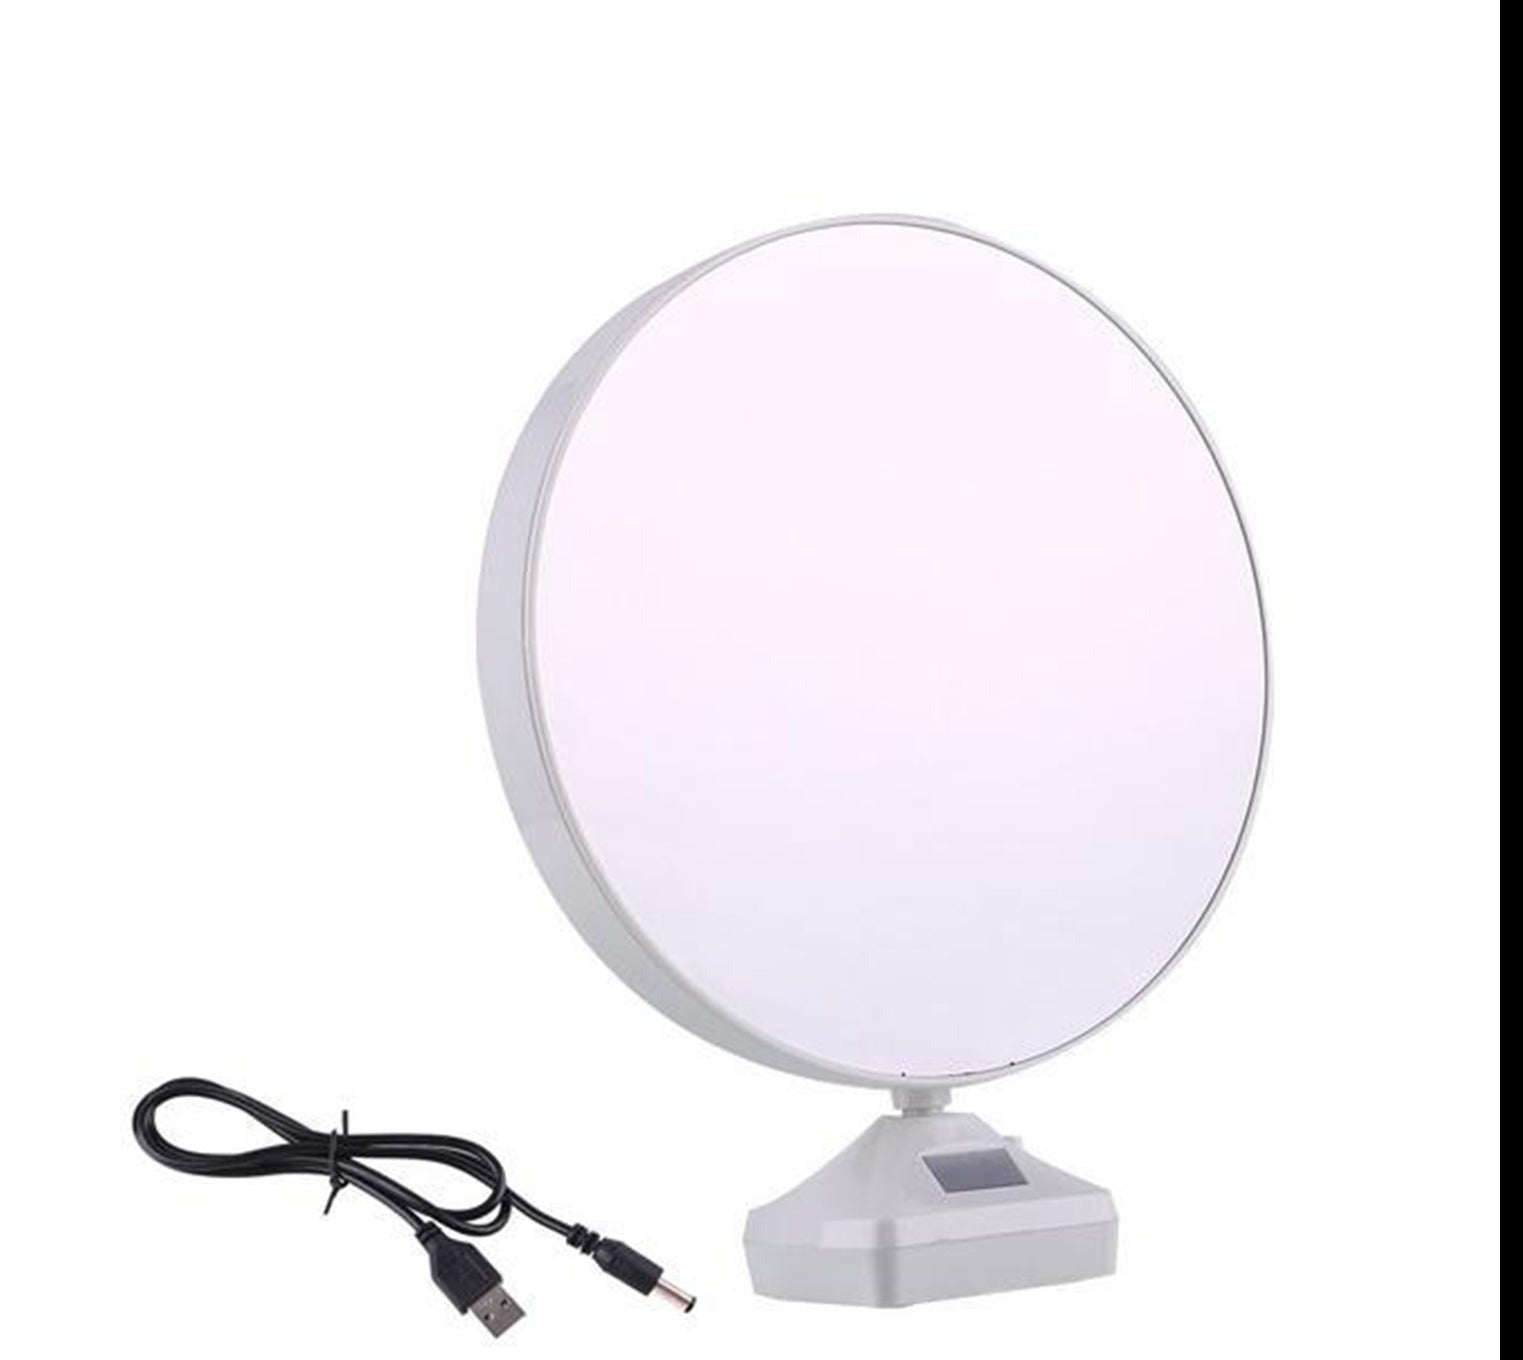 Plastic 2 in 1 Mirror Come Photo Frame with Led Light